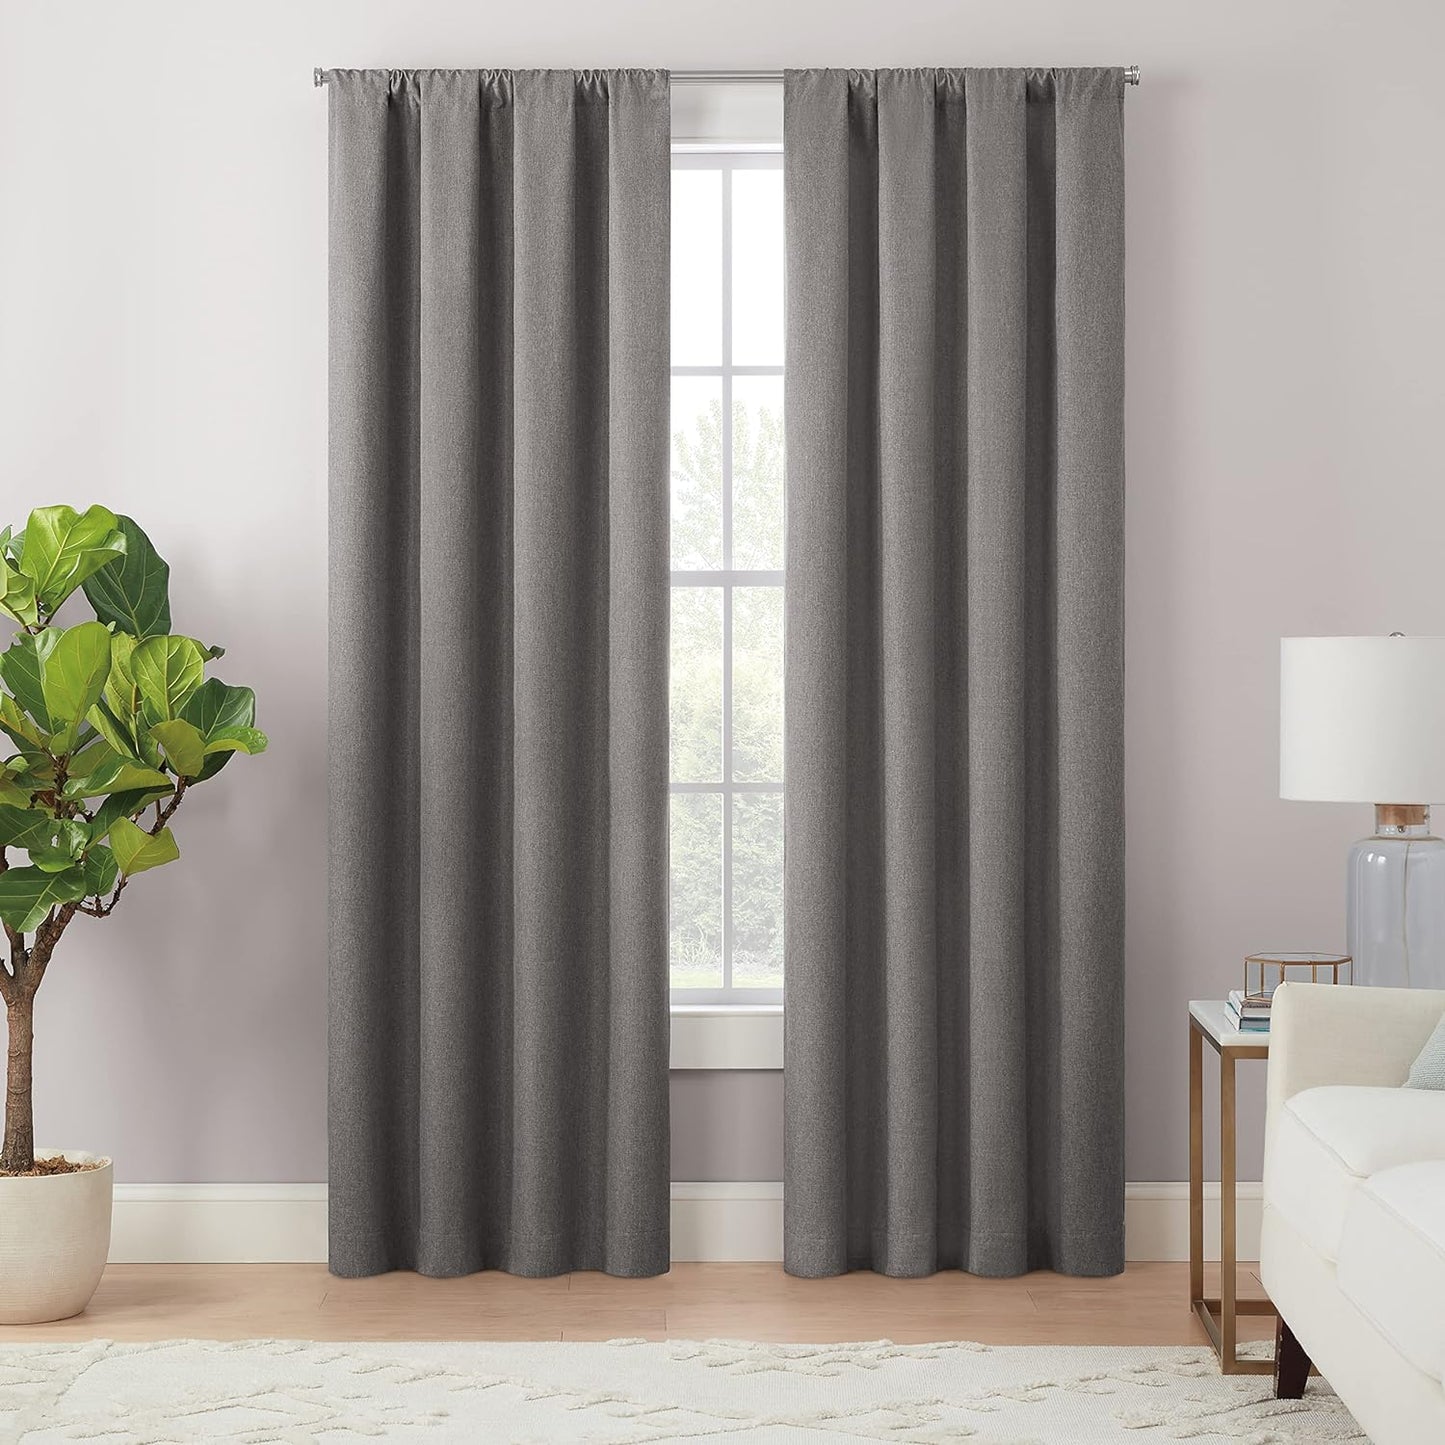 Eclipse Cannes Magnitech 100% Blackout Curtain, Rod Pocket Window Curtain Panel, Seamless Magnetic Closure for Bedroom, Living Room or Nursery, 63 in Long X 40 in Wide, (1 Panel), Natural/ Linen  KEECO Charcoal Rod Pocket 40X84